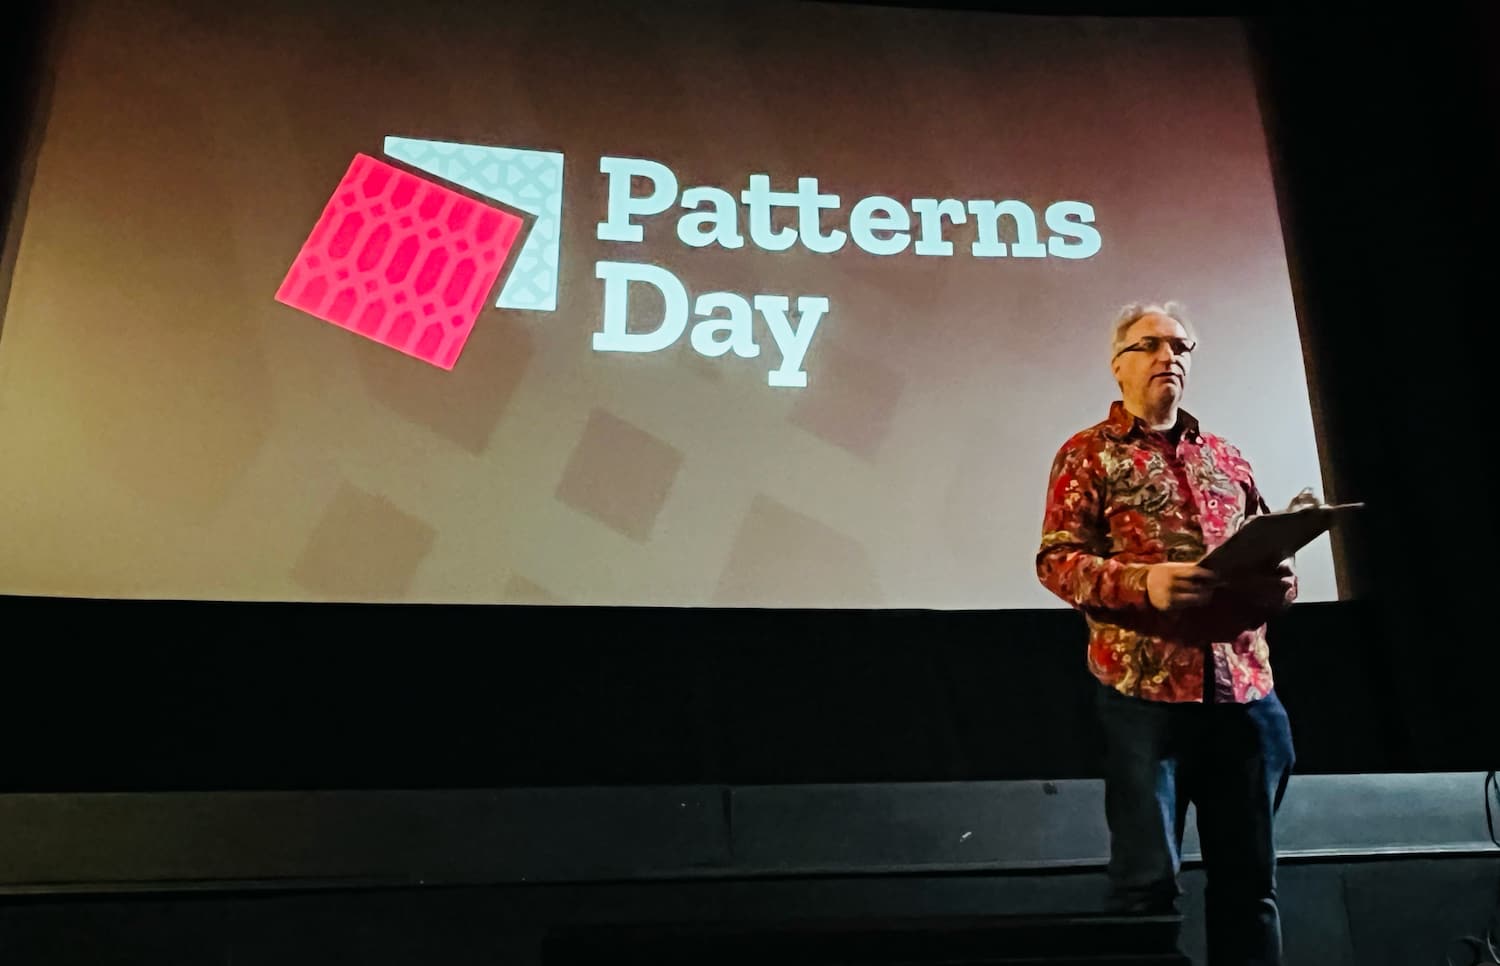 Jeremy presenting in front of the patterns day logo on screen